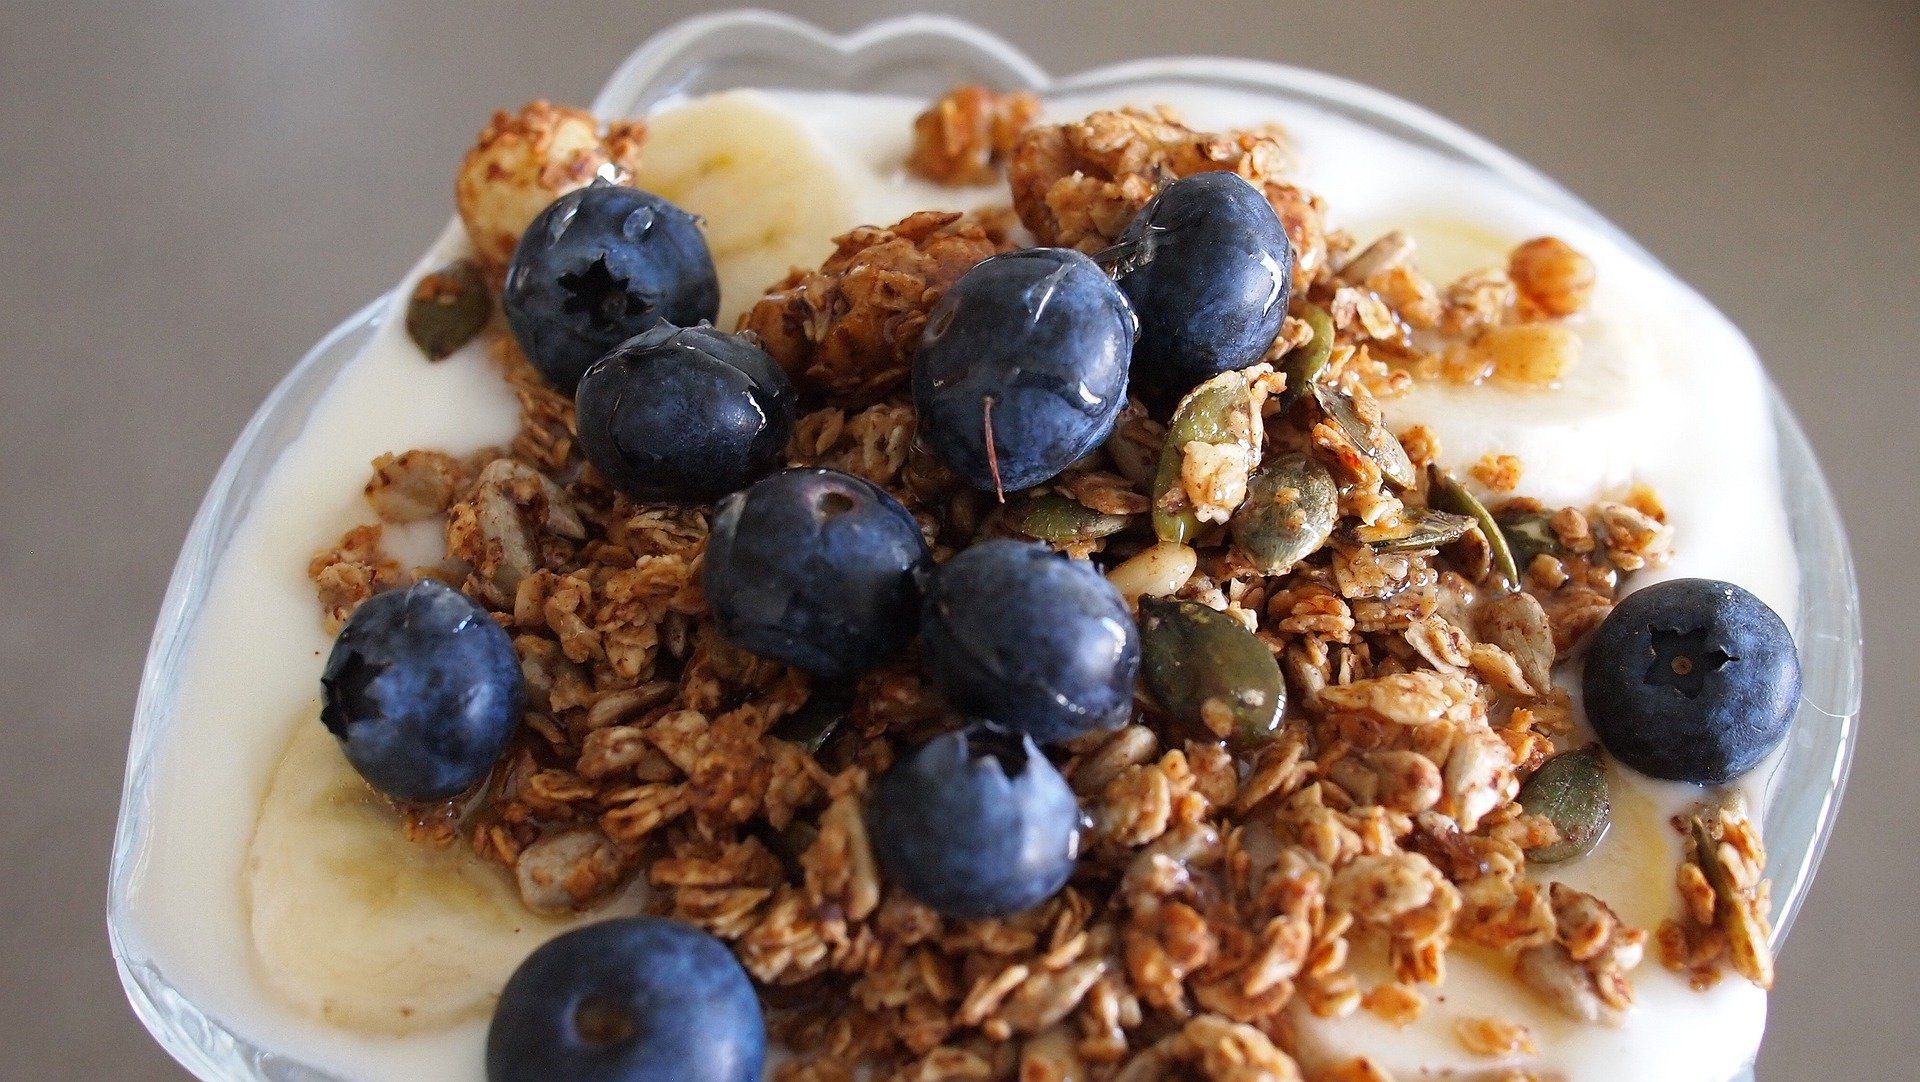 Home made granola with. yogurt and blueberries